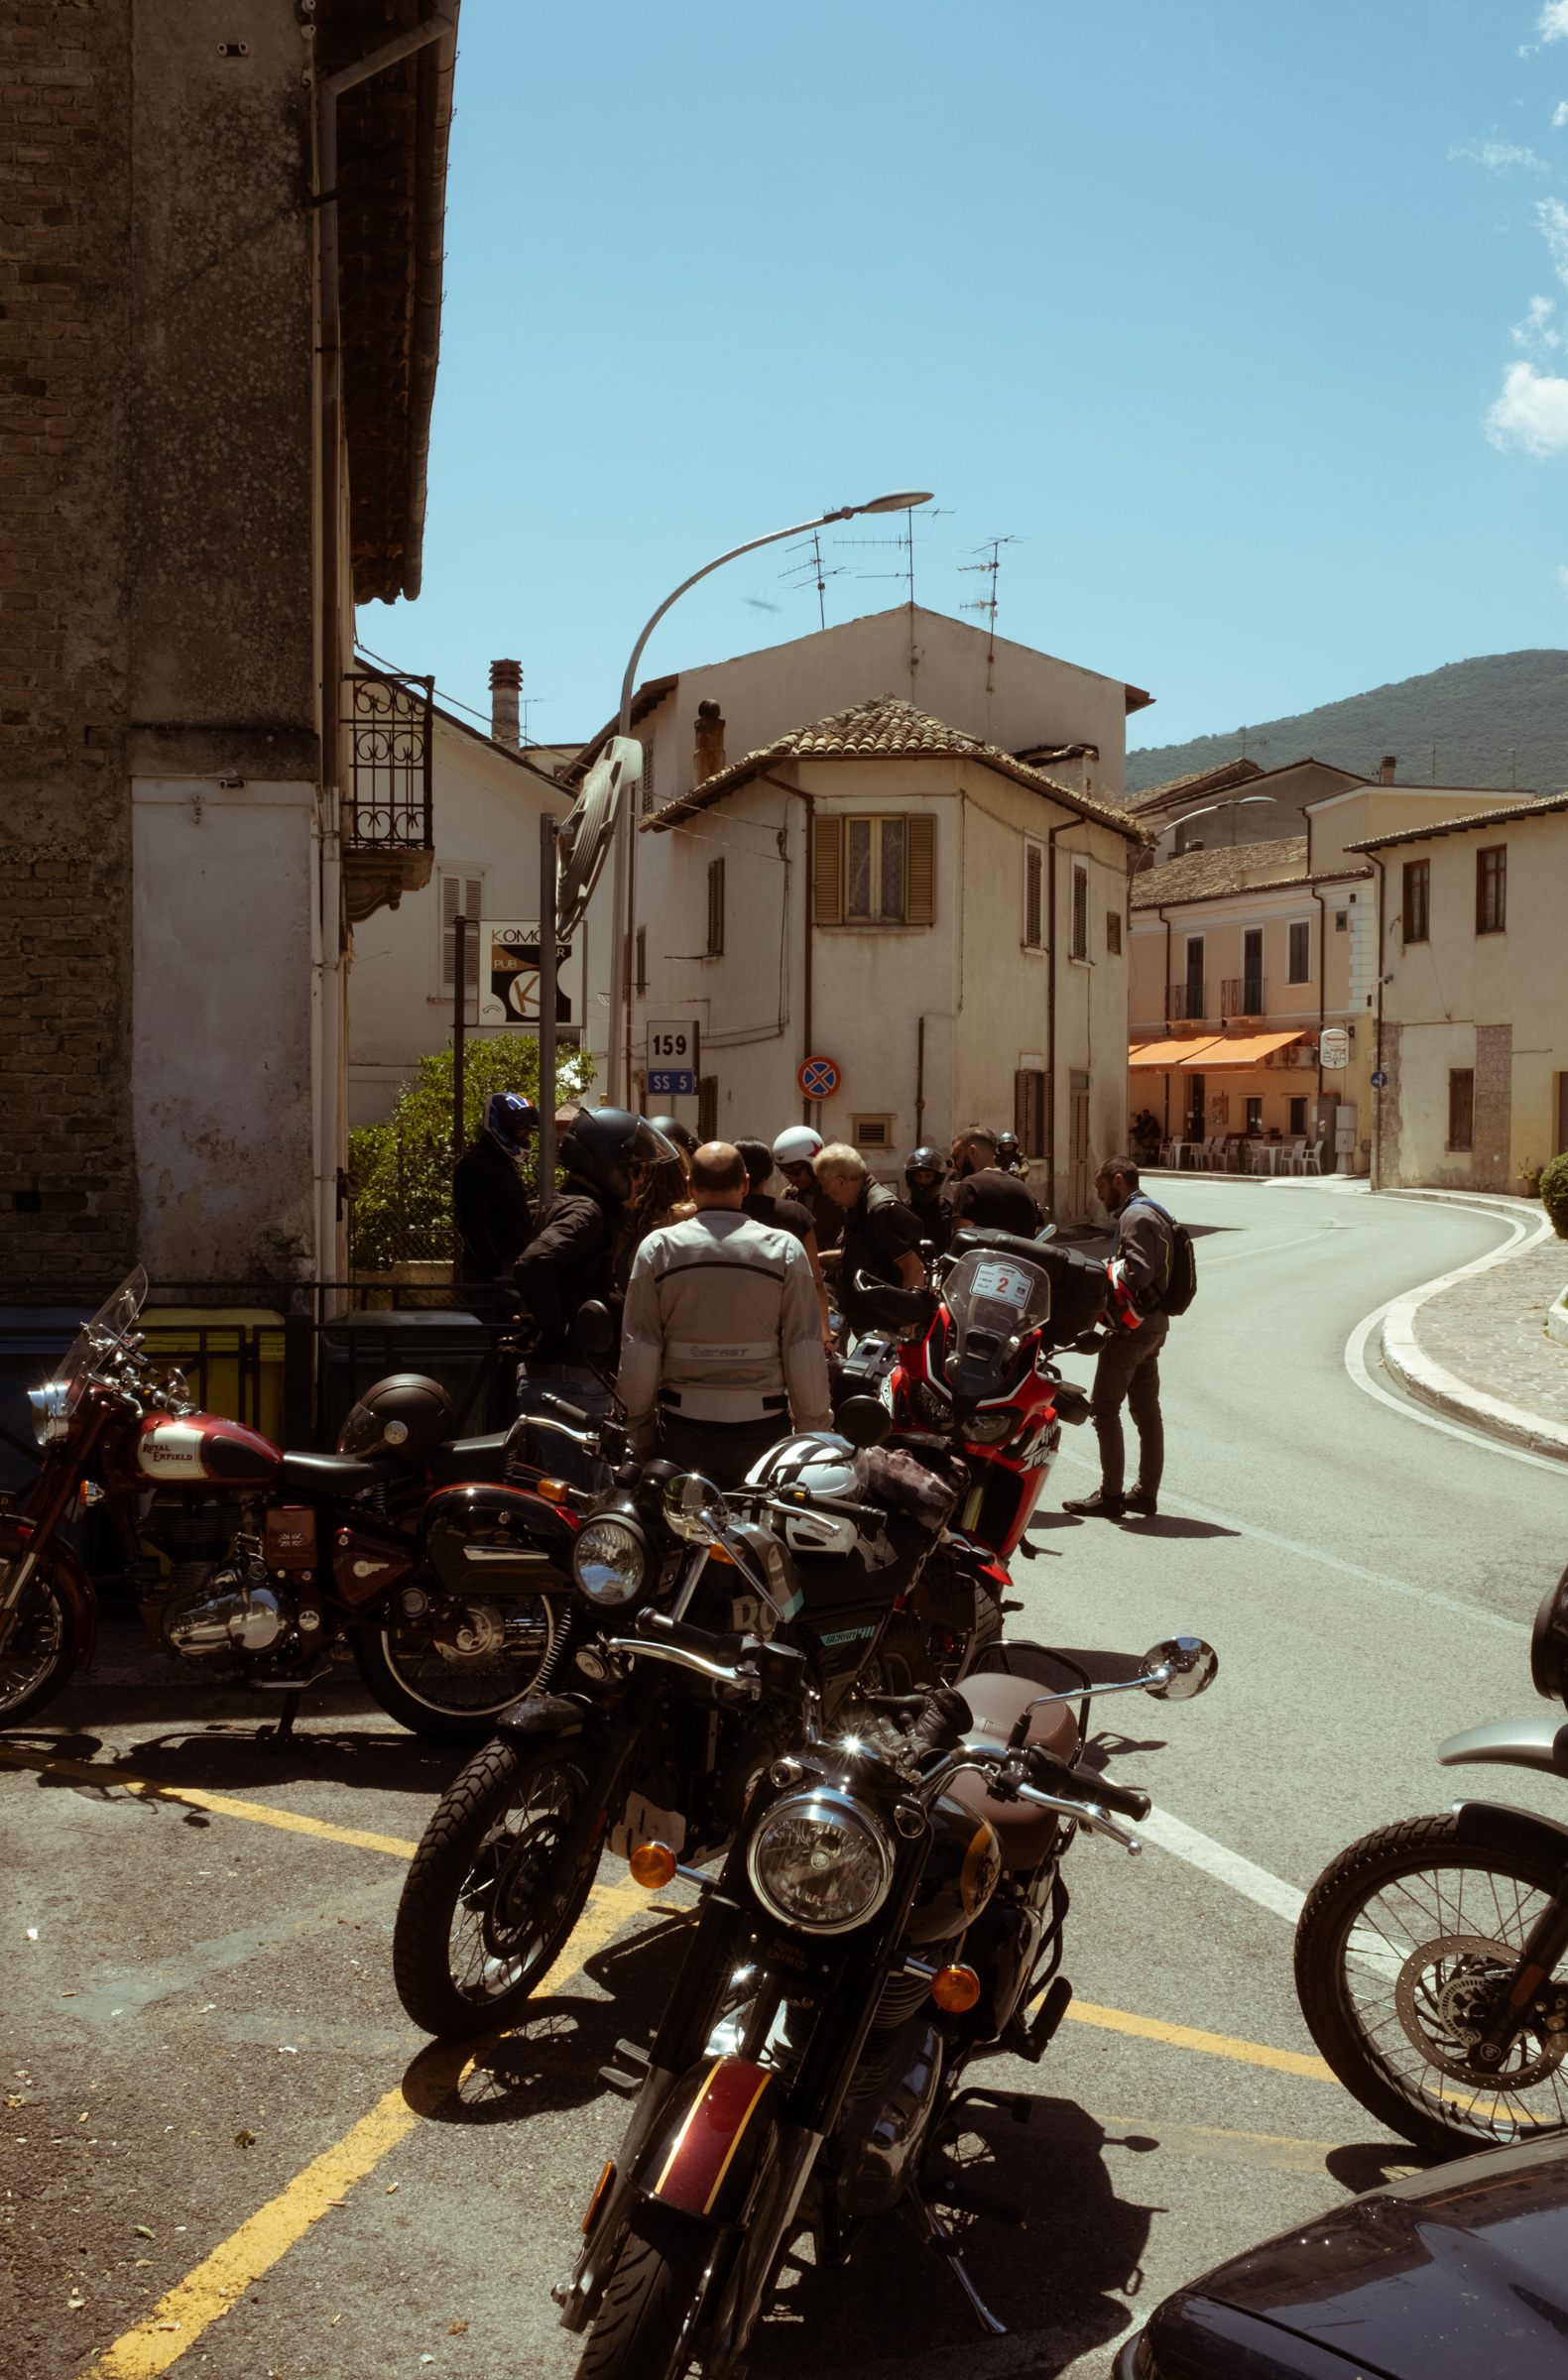 Motorcyclists stop for a break in a Medieval town in Abruzzo, Italy